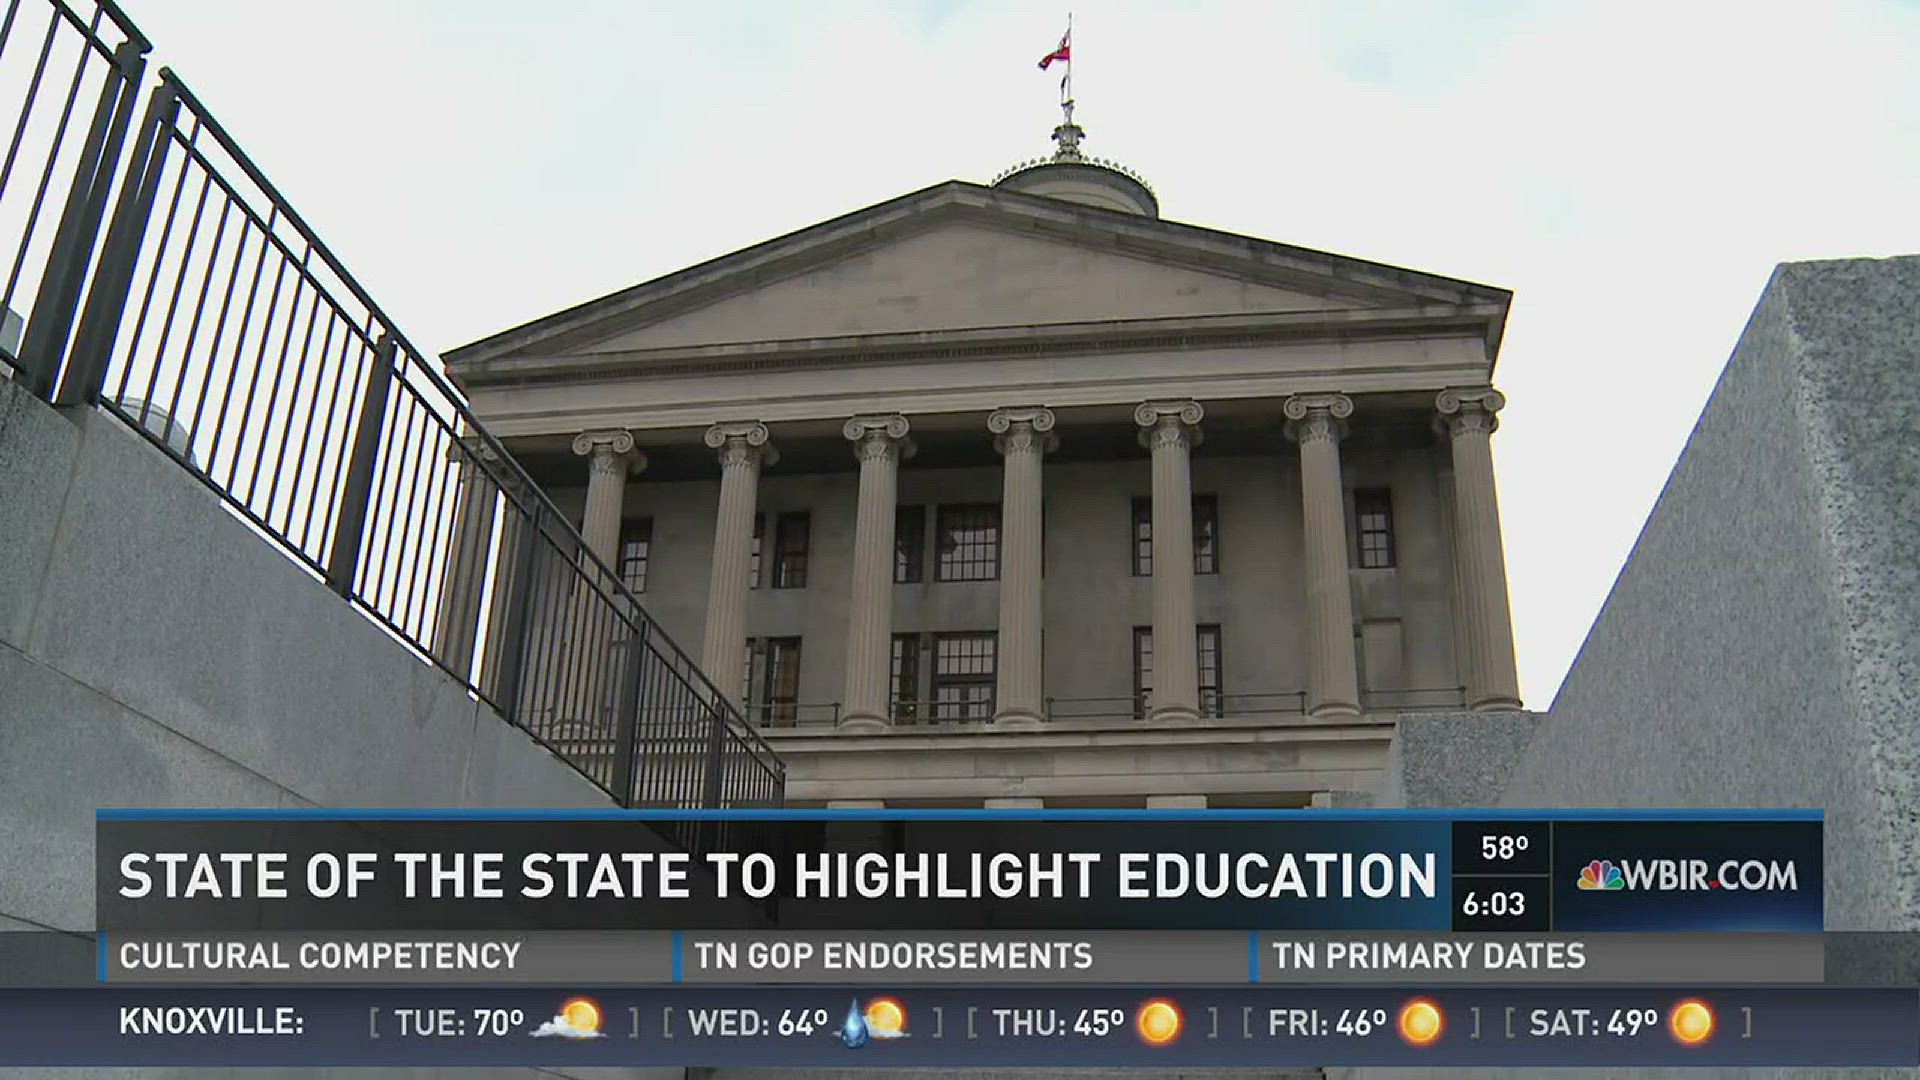 Gov. Bill Haslam's State of the State address is expected to address education, possible infrastructure upgrades, and overall plans for 2016. (2/1/16 6PM)